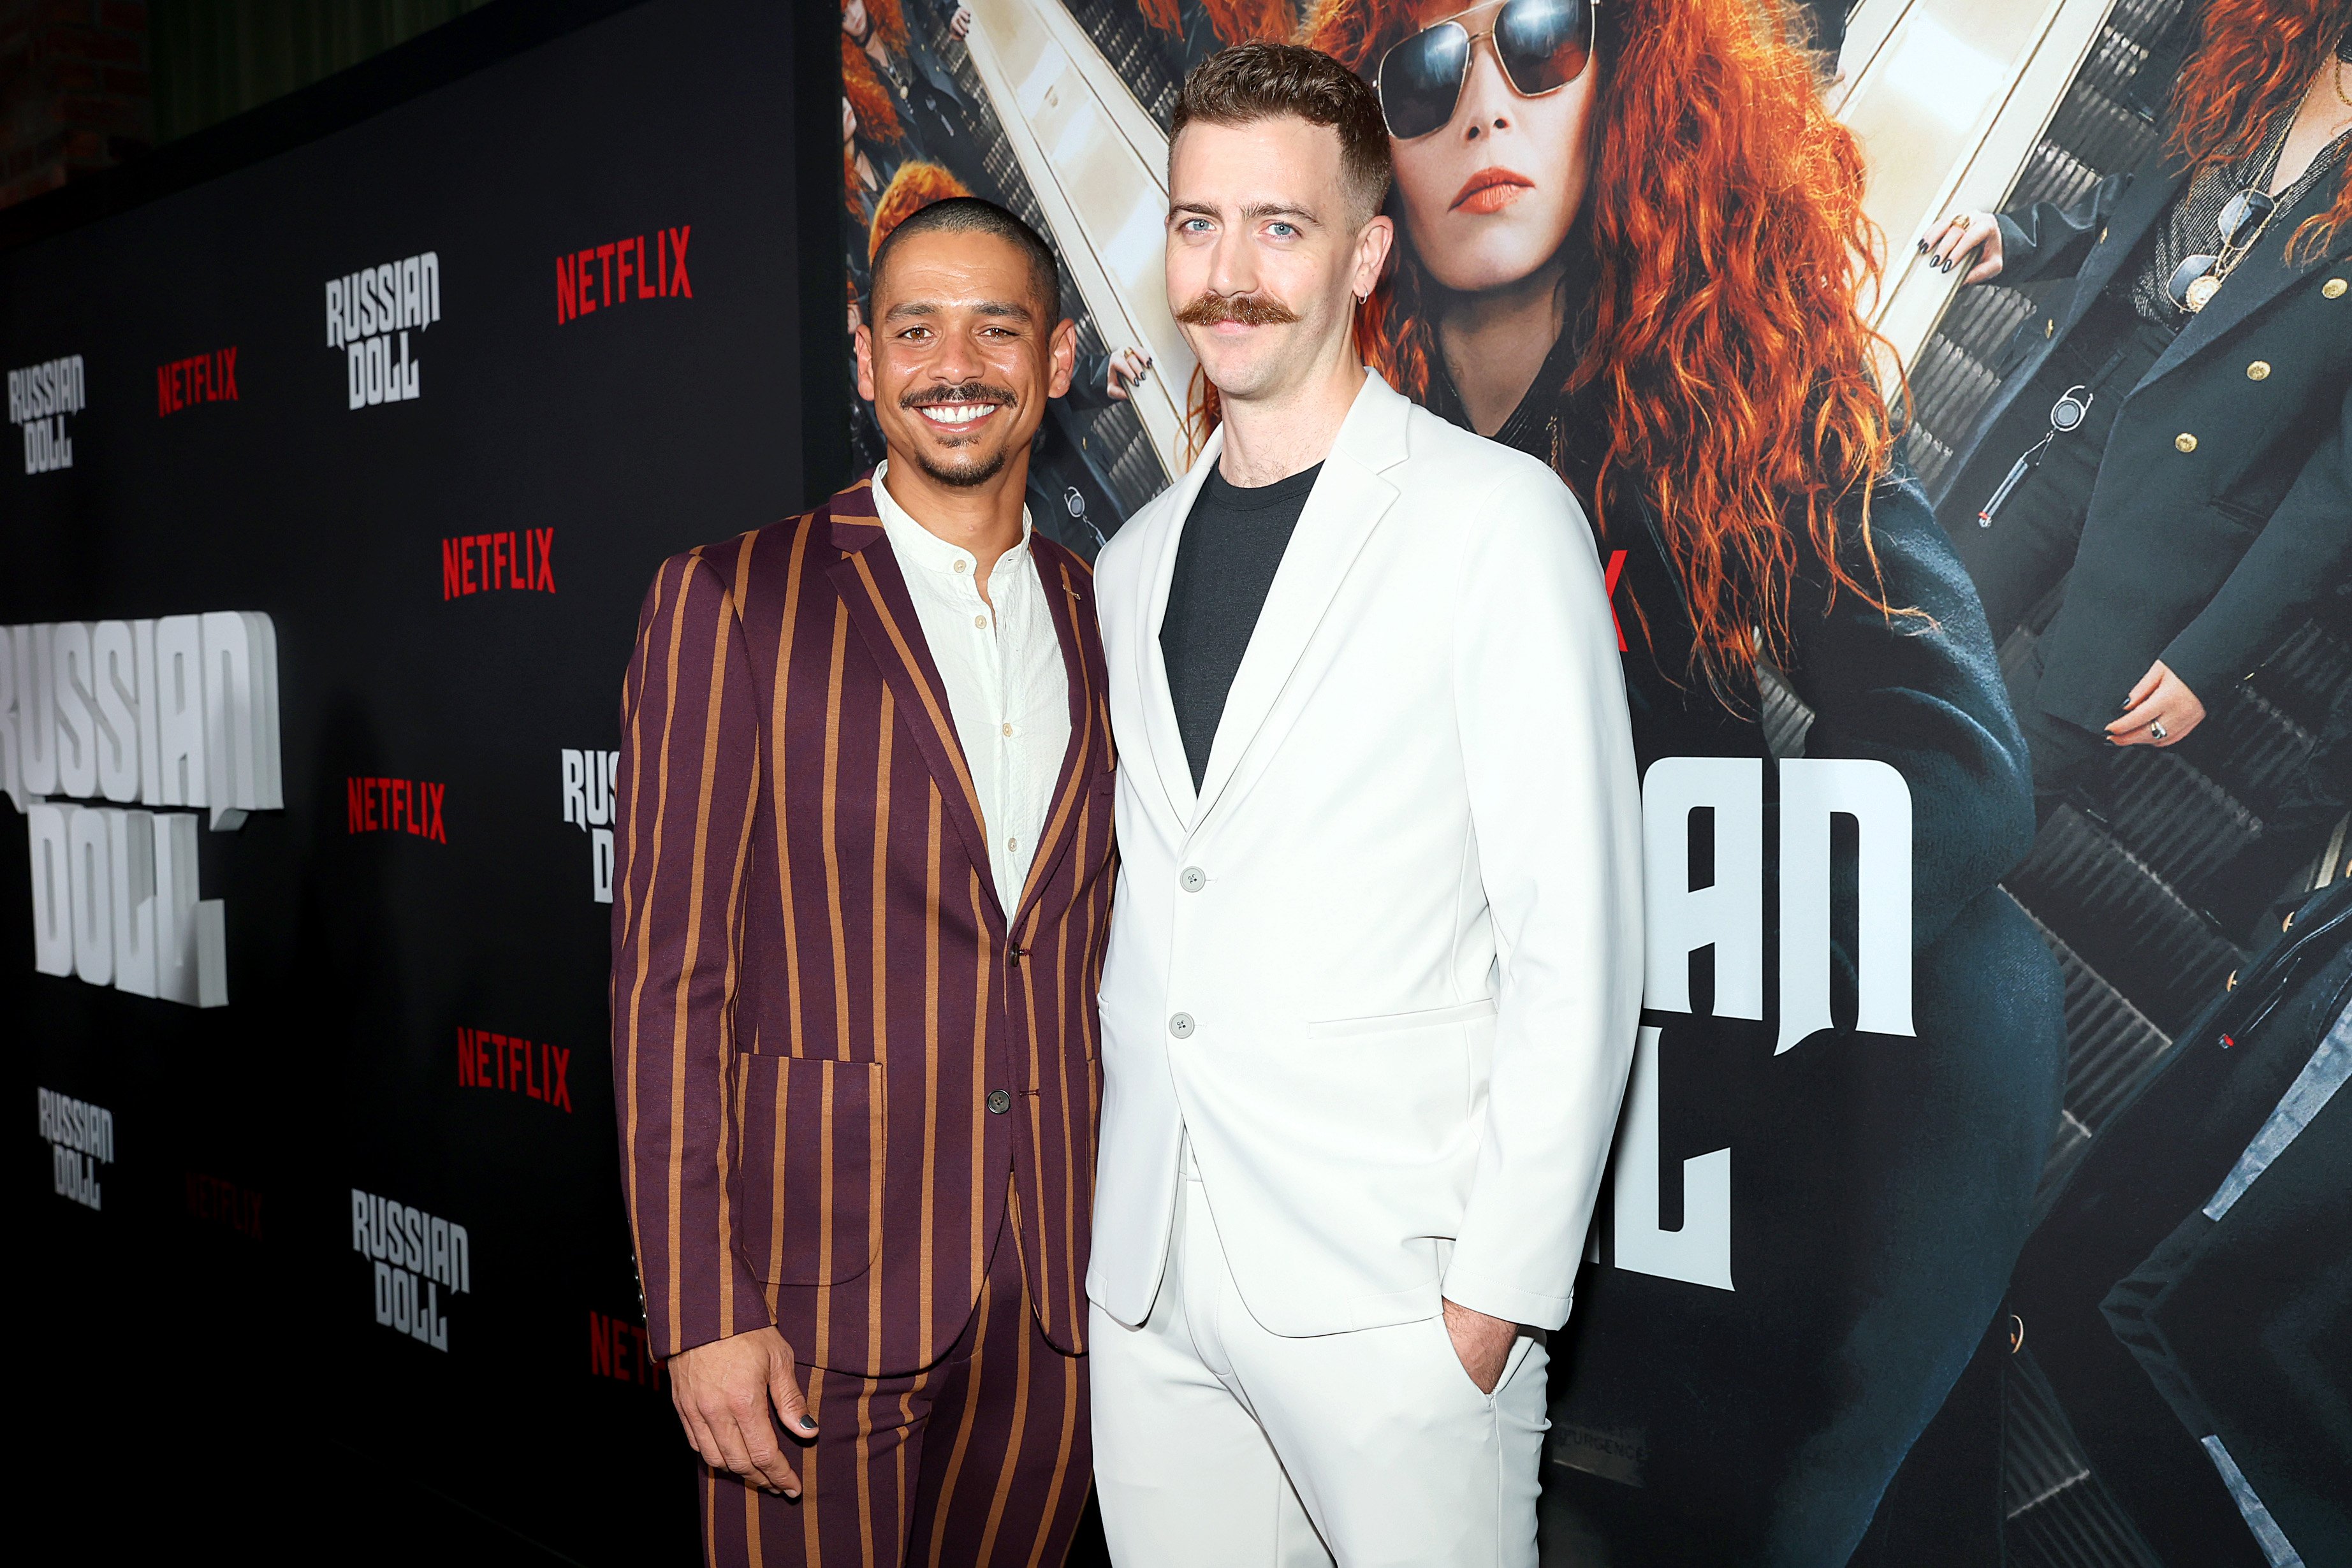 Charlie Barnett and Drew Bender at the season two premiere of "Russian Doll" at The Bowery Hotel, New York City, on April 19, 2022. | Source: Getty Images